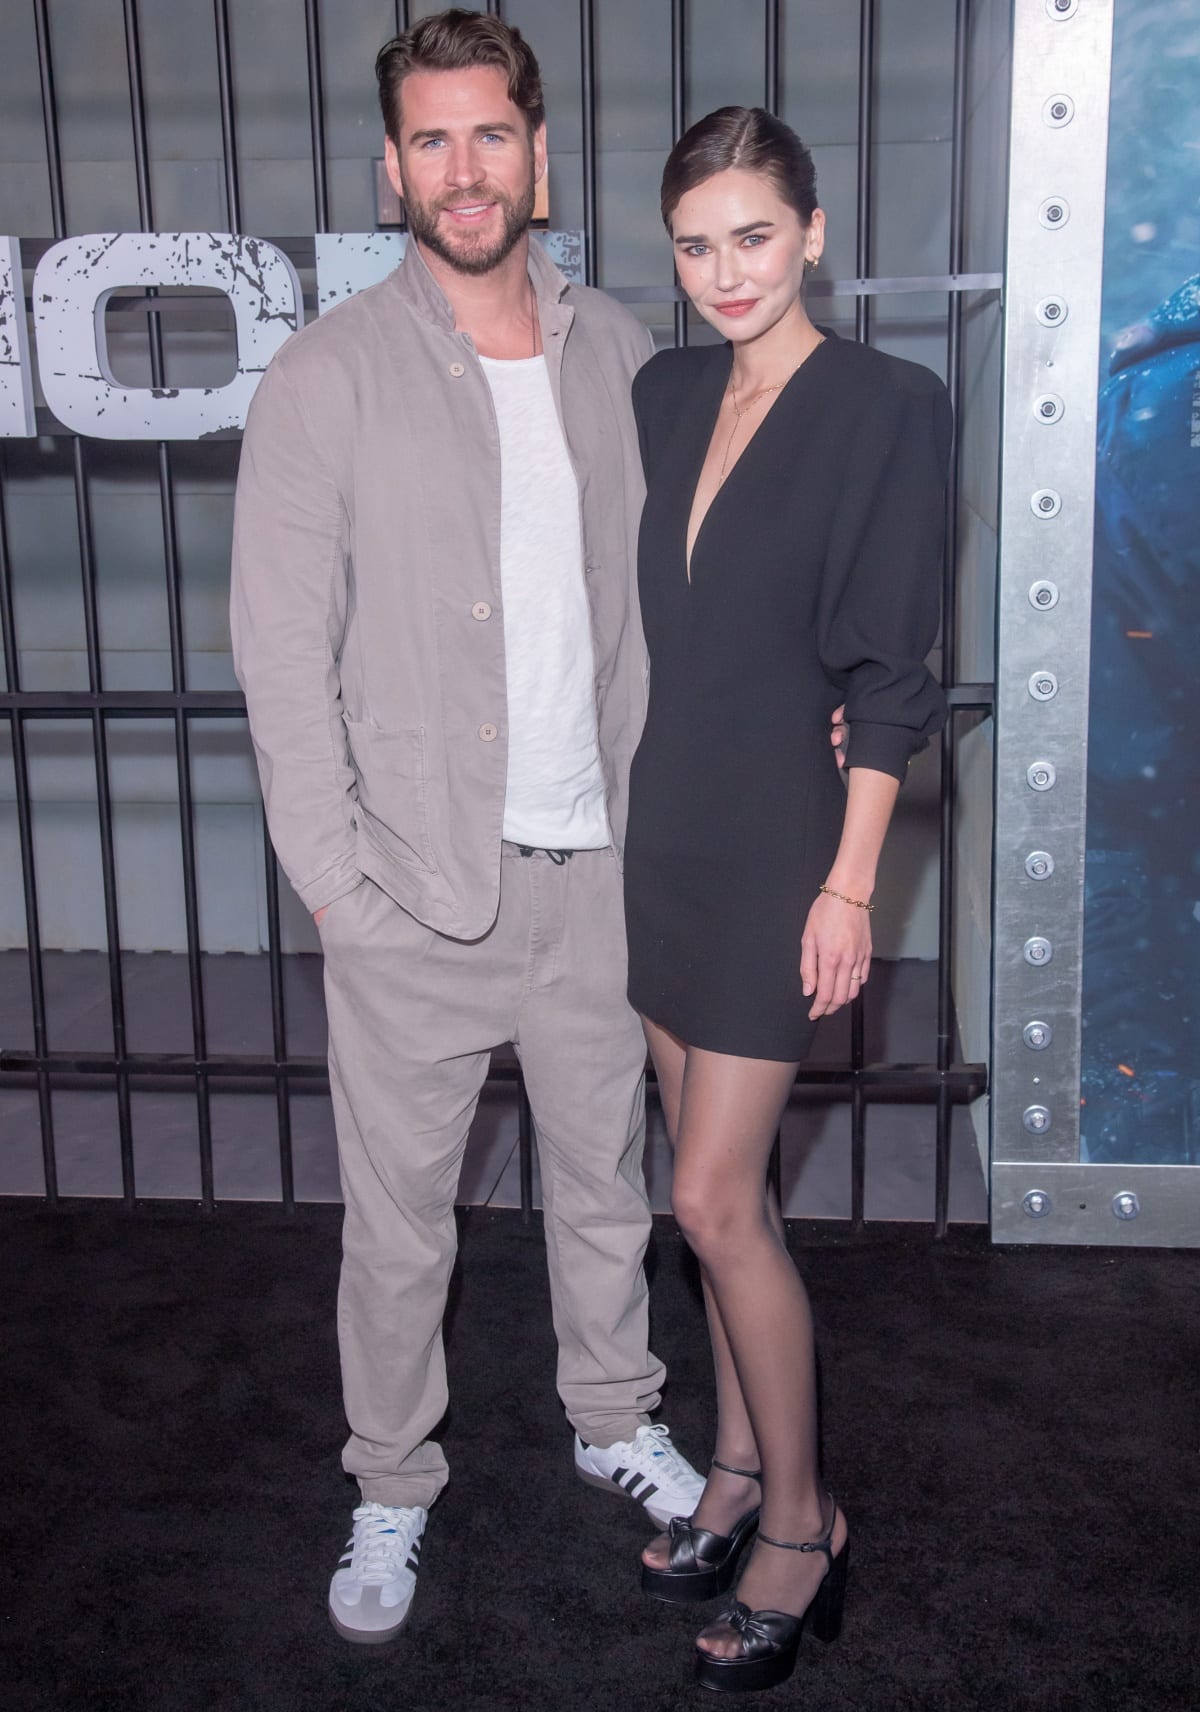 Gabriella Brooks stands at a height of 5'9" (175 cm), while Liam Hemsworth, known for his towering presence, measures 6'3 ¼" (191.1 cm), making him significantly taller than Brooks